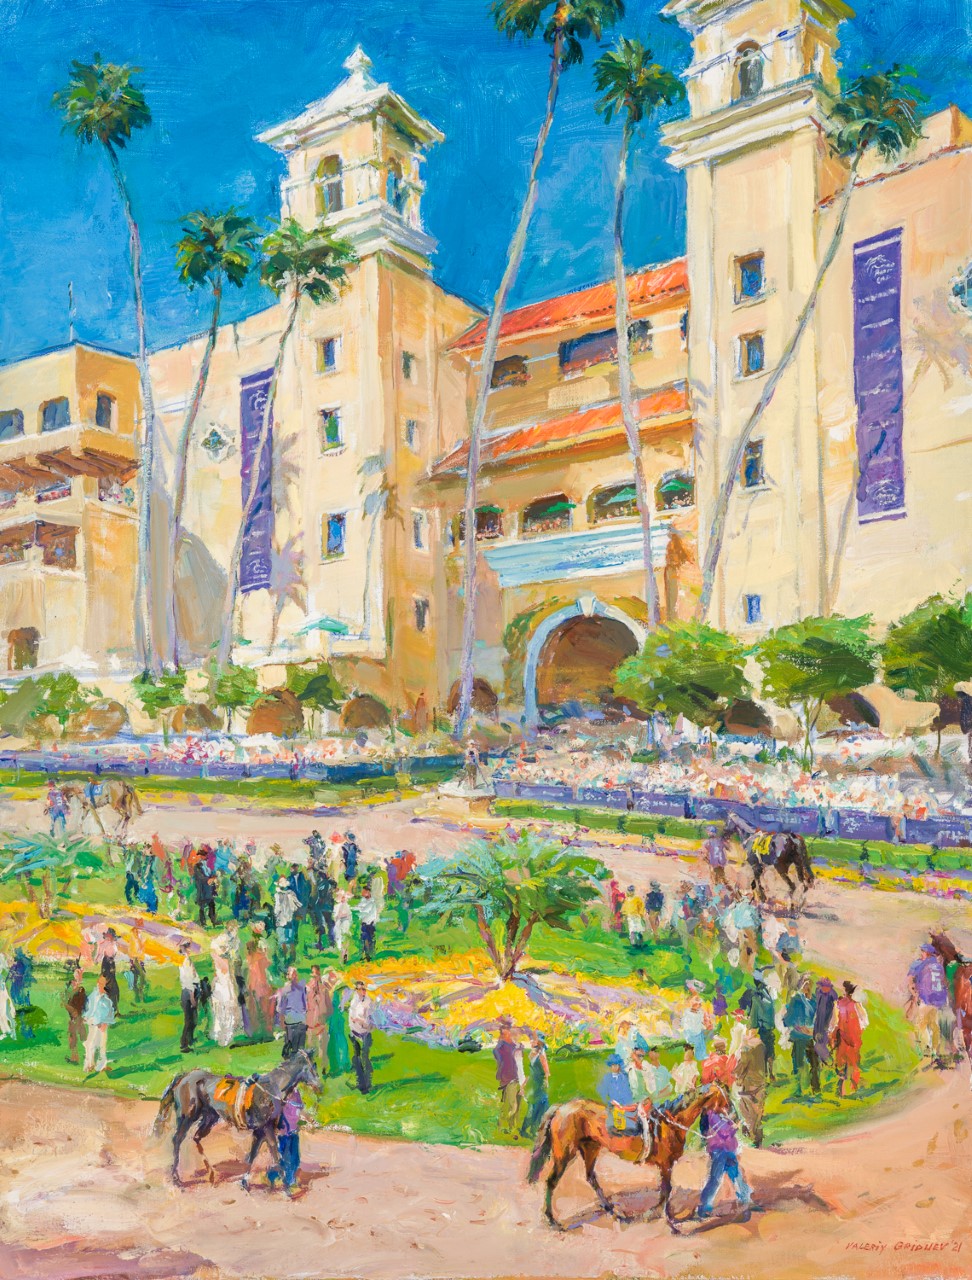 Coming under the hammer: Valeriy Gridnev’s original painting of a paddock scene at Del Mar Thoroughbred Club was part of the cover artwork for the official programs of the 2021 Breeders’ Cup